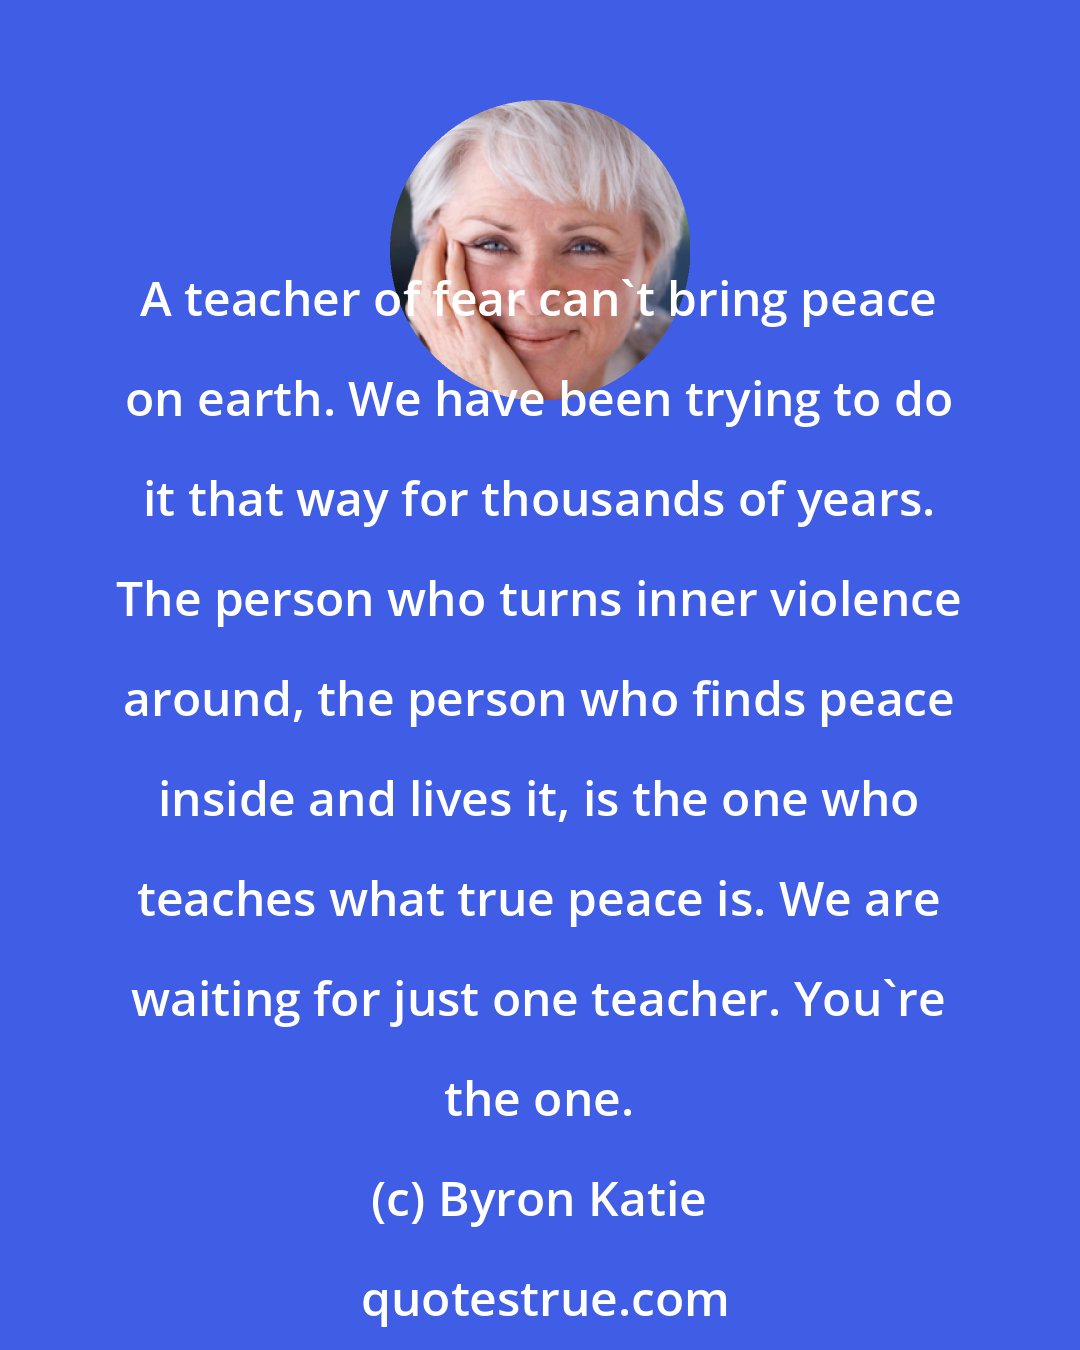 Byron Katie: A teacher of fear can't bring peace on earth. We have been trying to do it that way for thousands of years. The person who turns inner violence around, the person who finds peace inside and lives it, is the one who teaches what true peace is. We are waiting for just one teacher. You're the one.